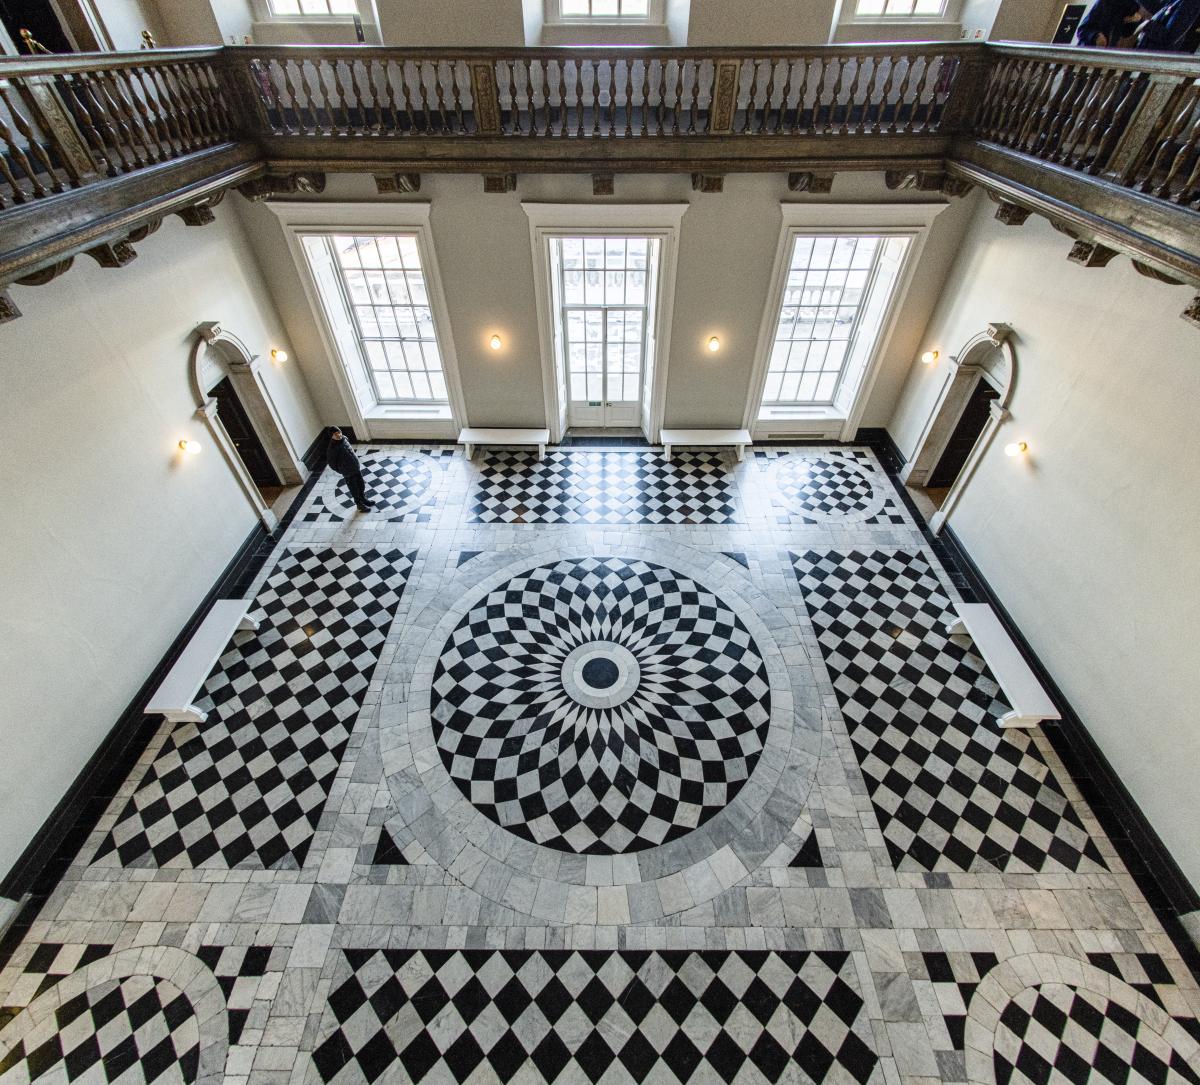 An overhead view of the Great Hall of the Queen's House, showing the geometric black and white pattern of the marble floor. Tall, ground level windows bathe the space in light, and a balcony runs round the top of the square room